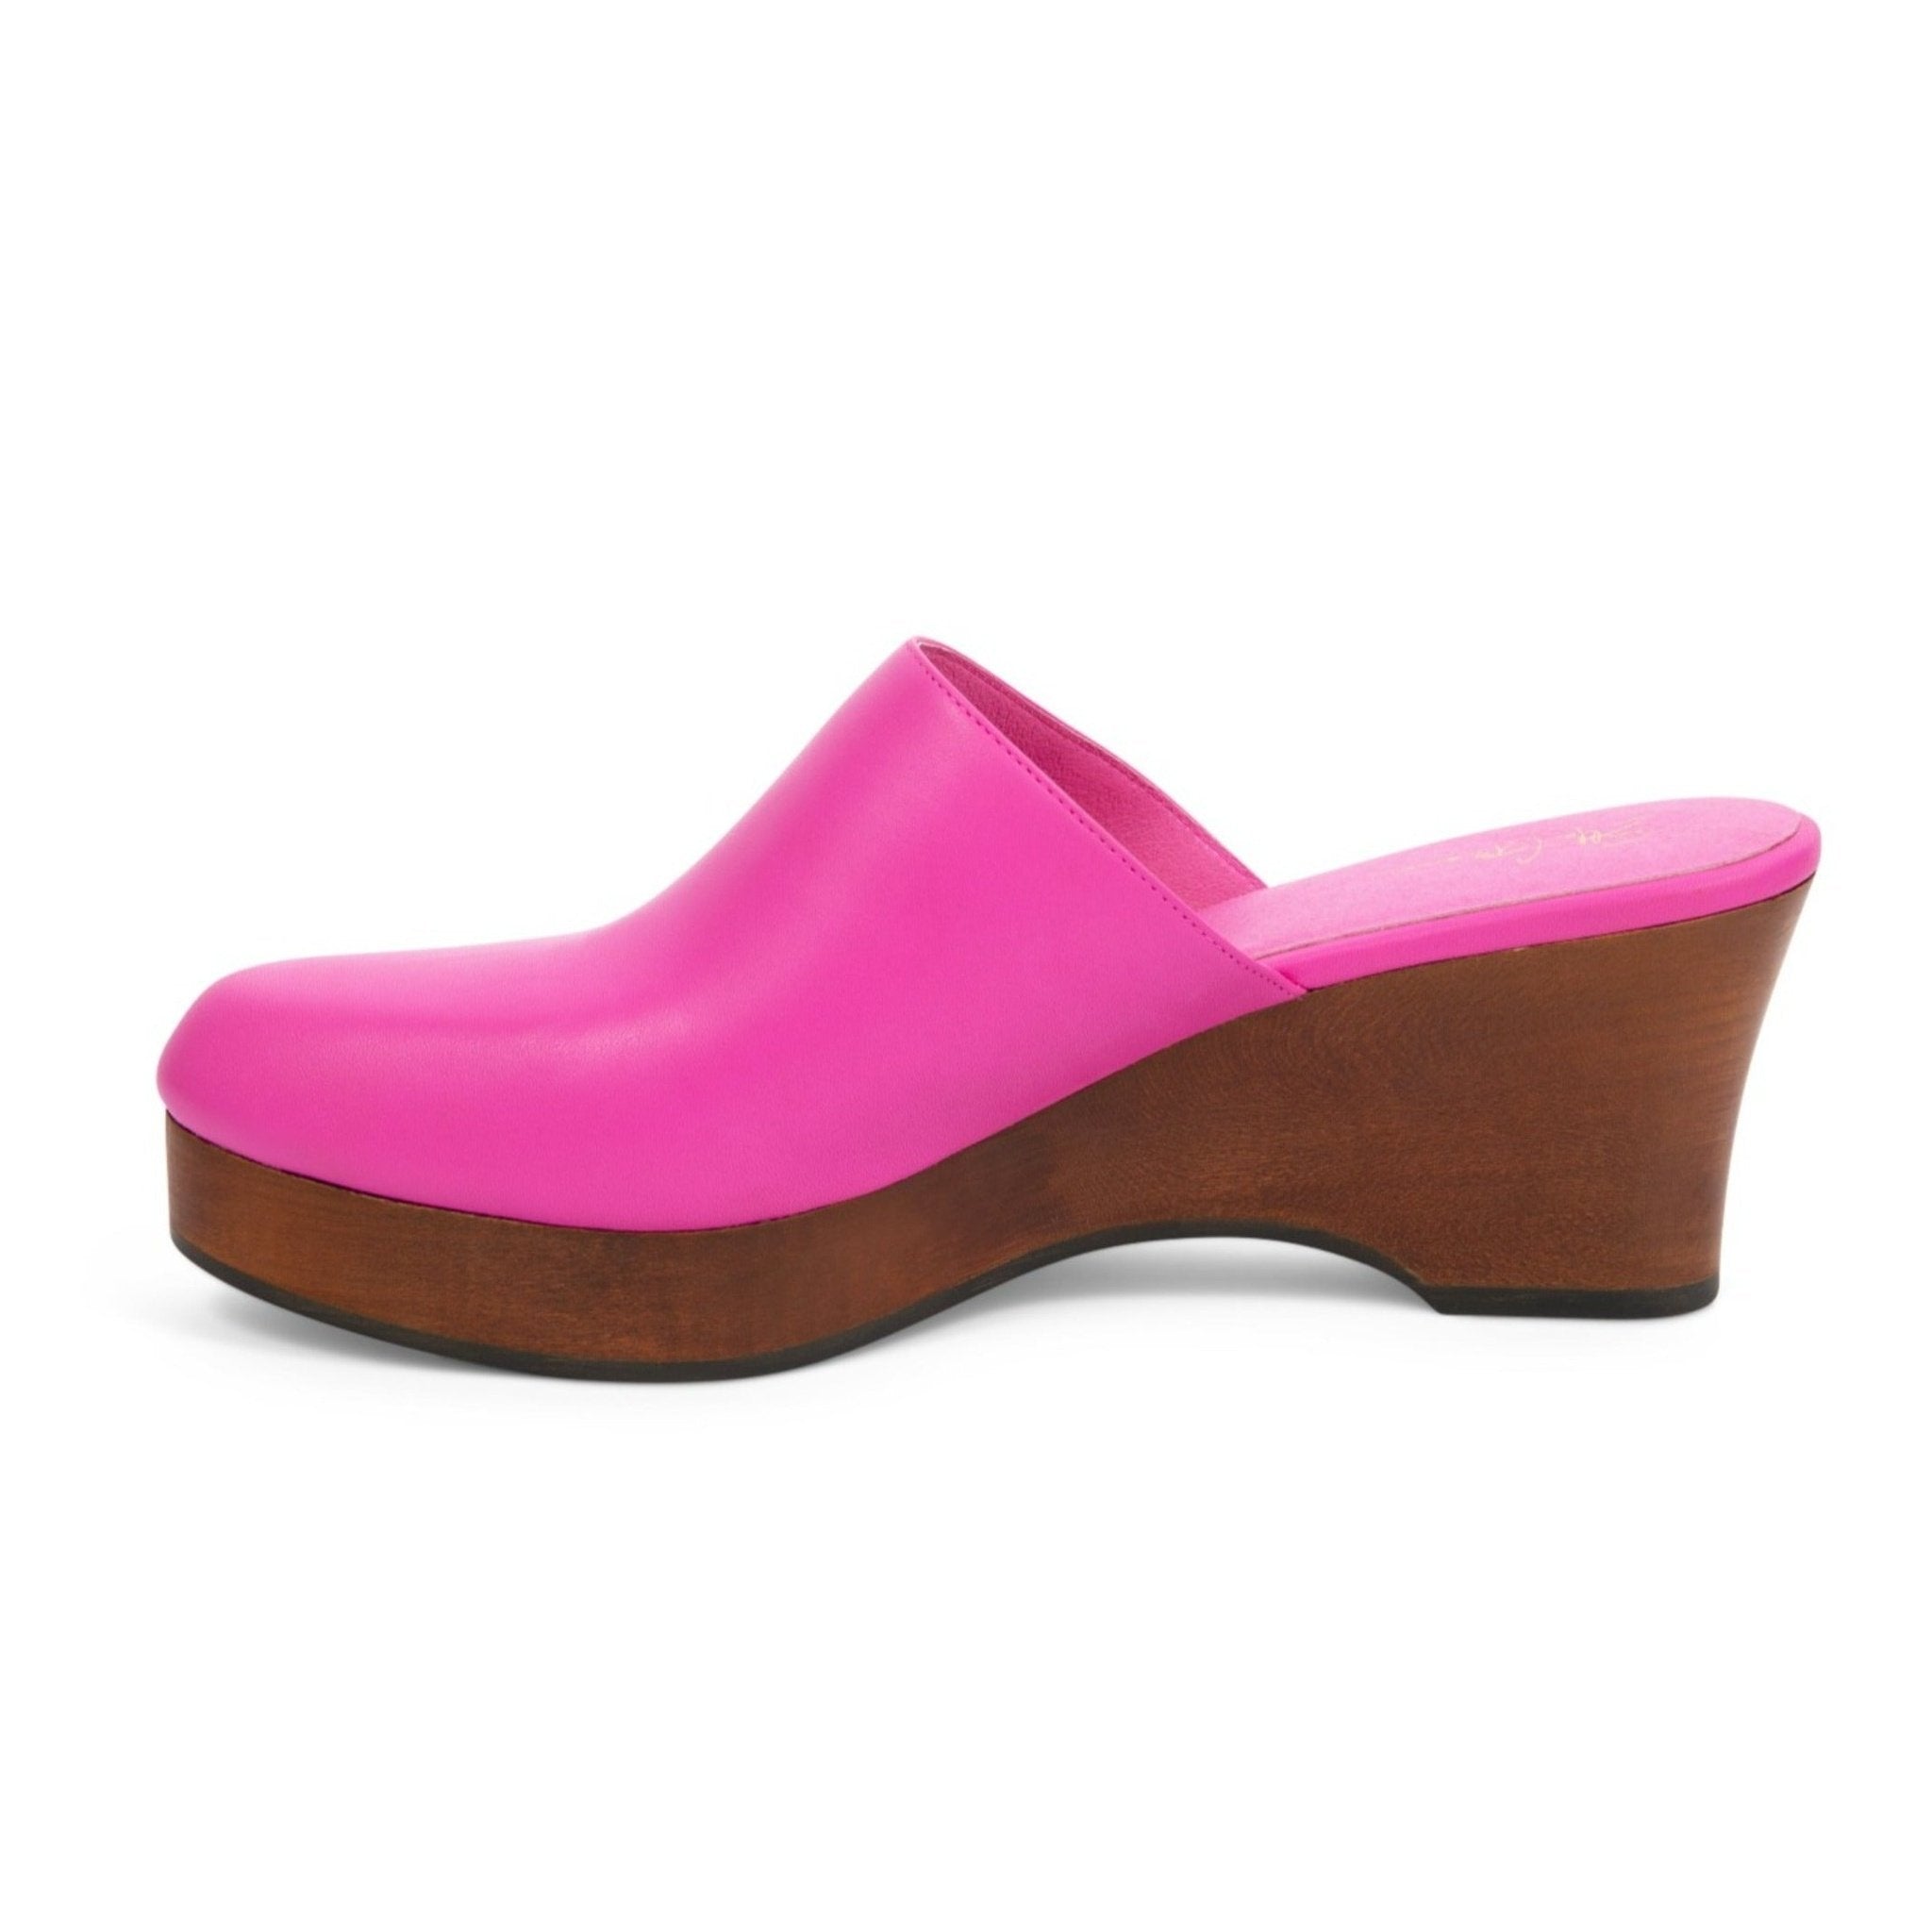 pink leather wedge heel mule clog for large sizes